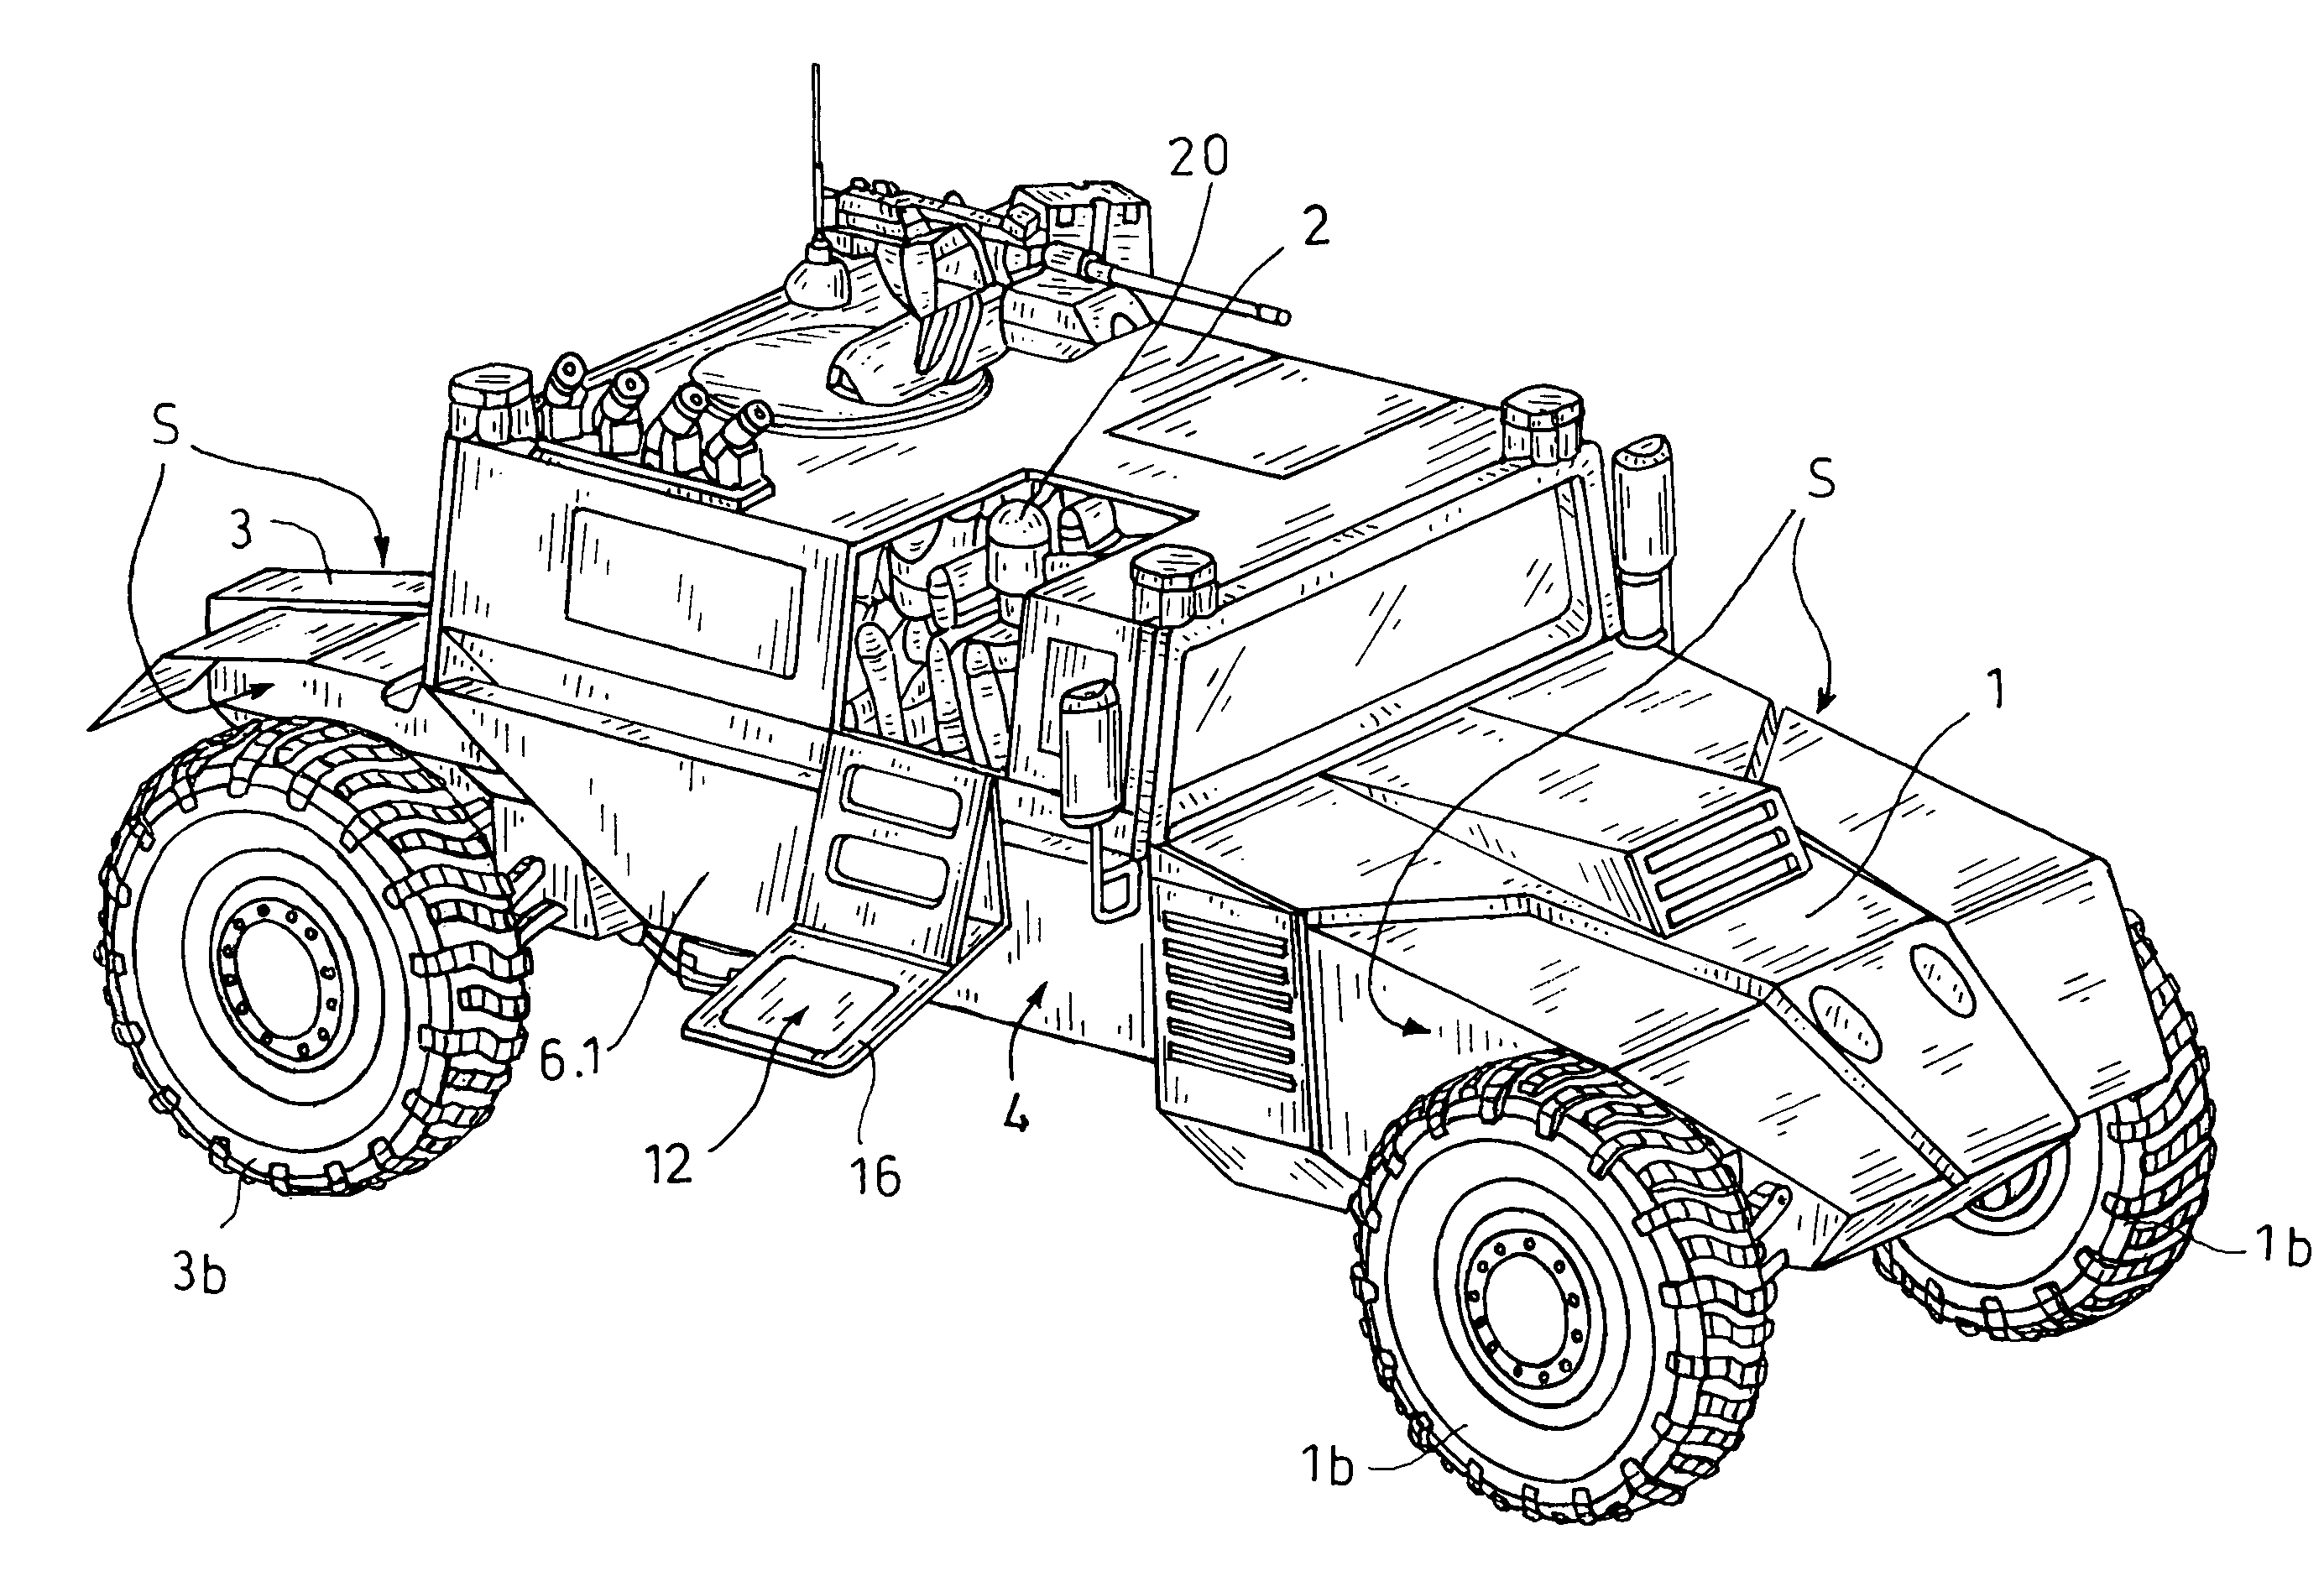 Mine protection vehicle system